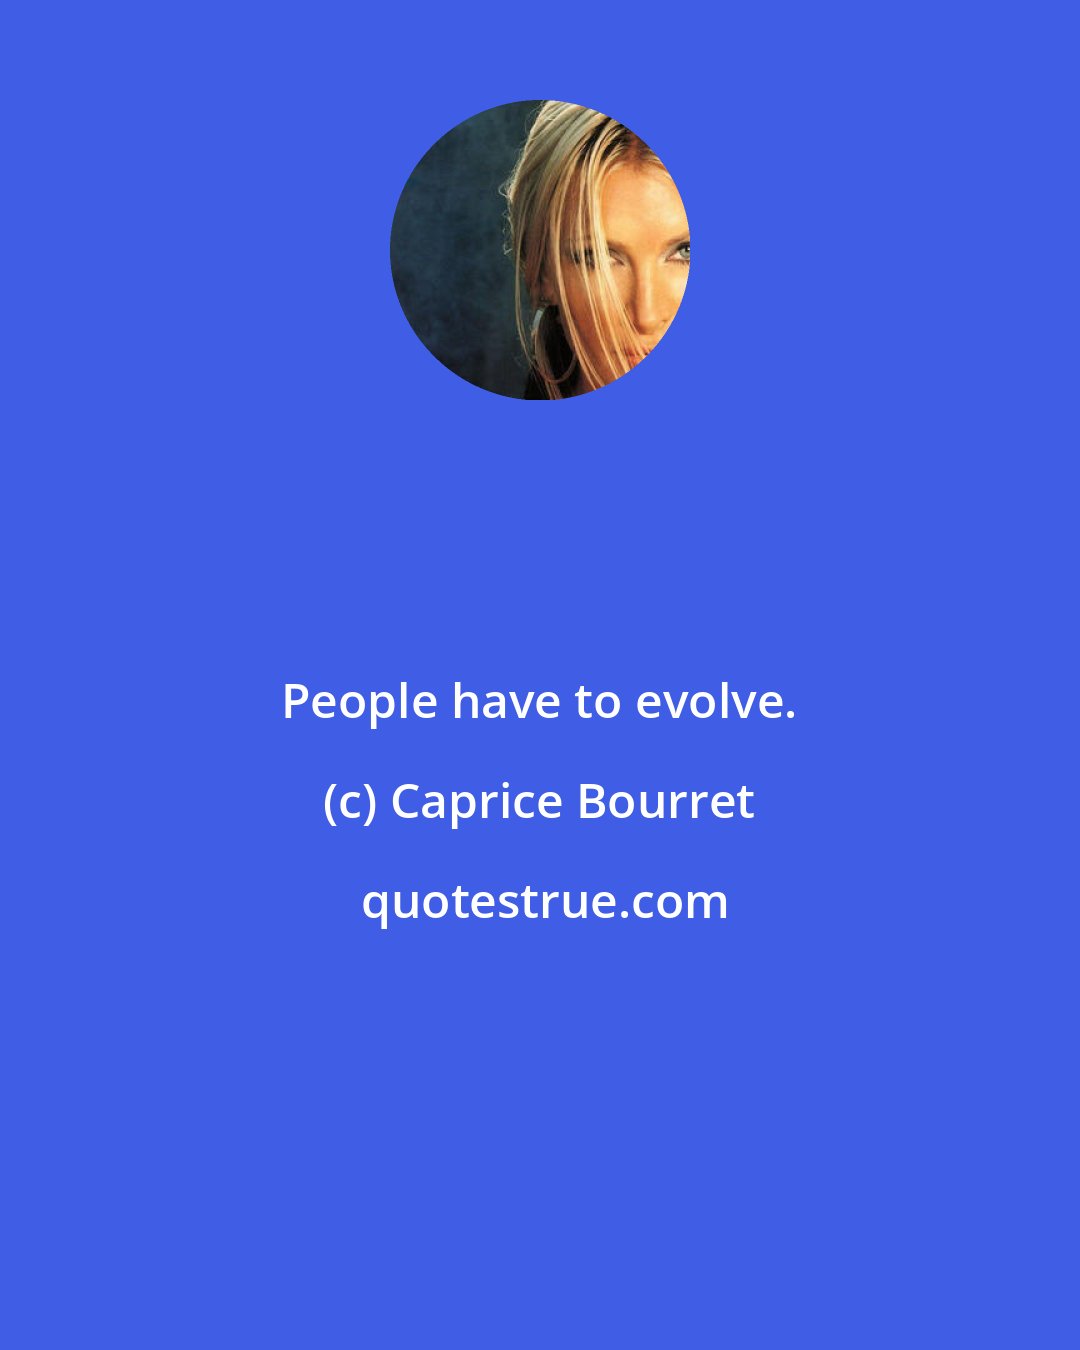 Caprice Bourret: People have to evolve.